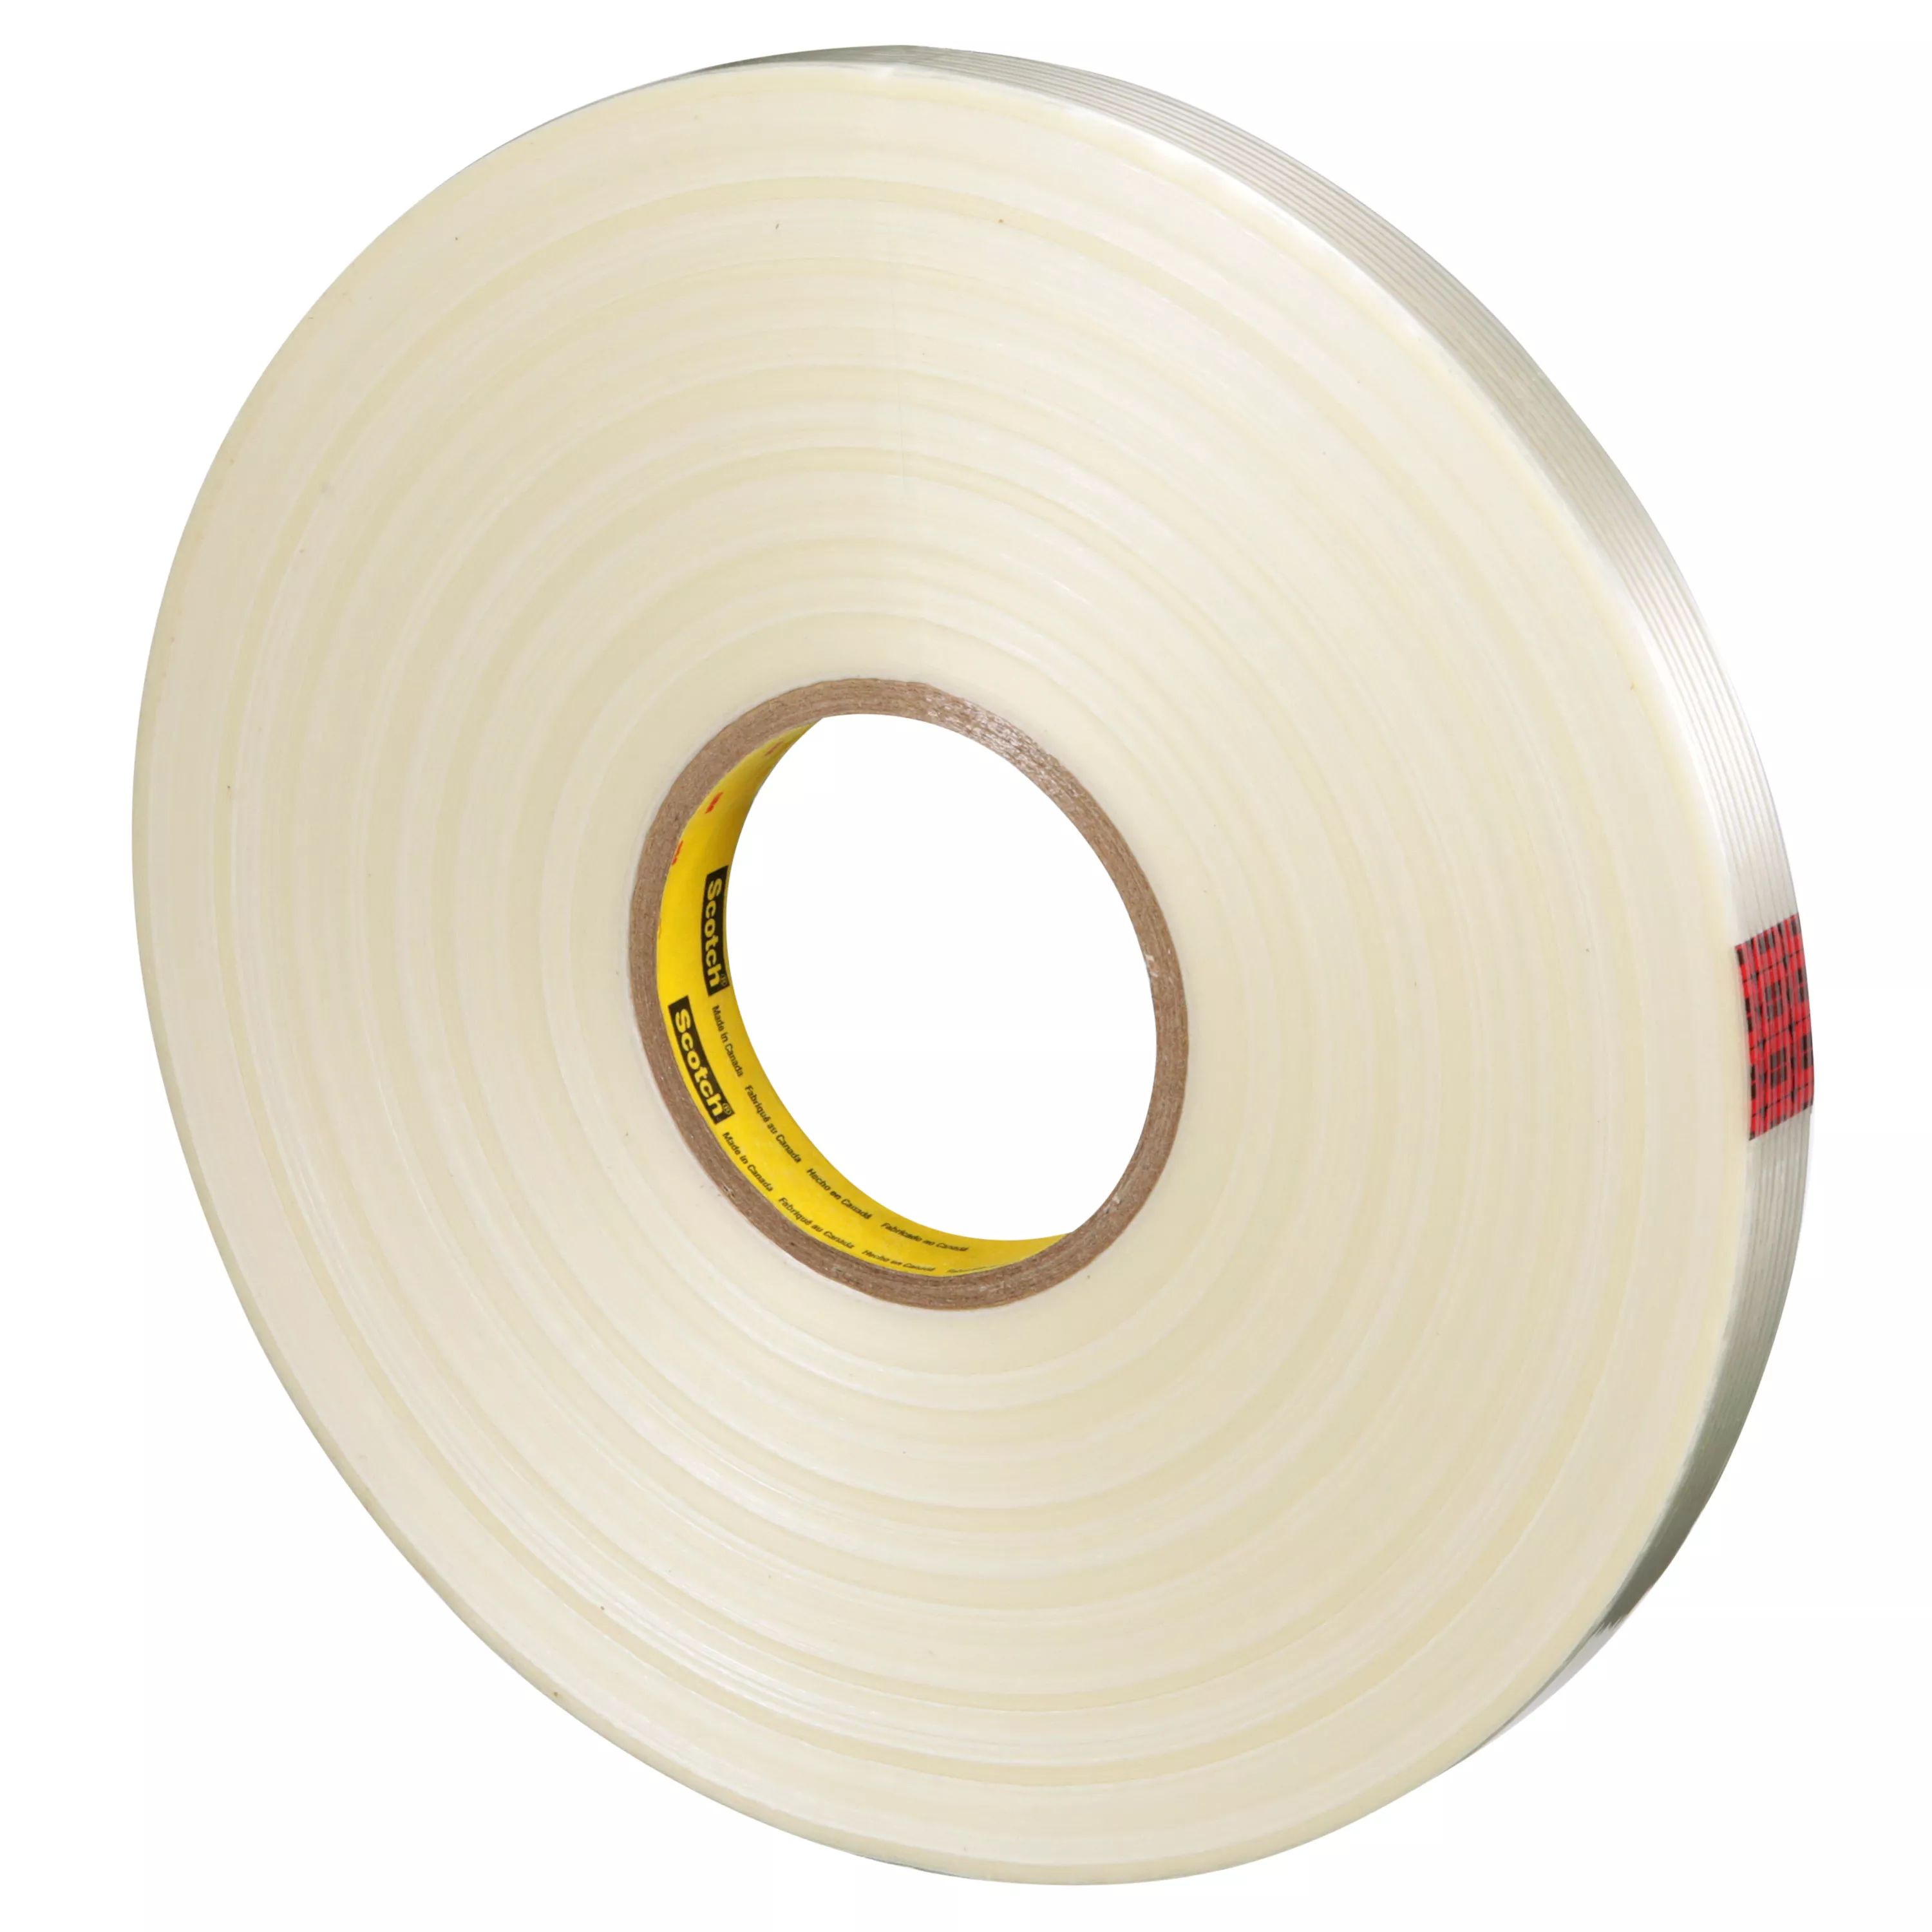 Product Number 897 | Scotch® Filament Tape 897